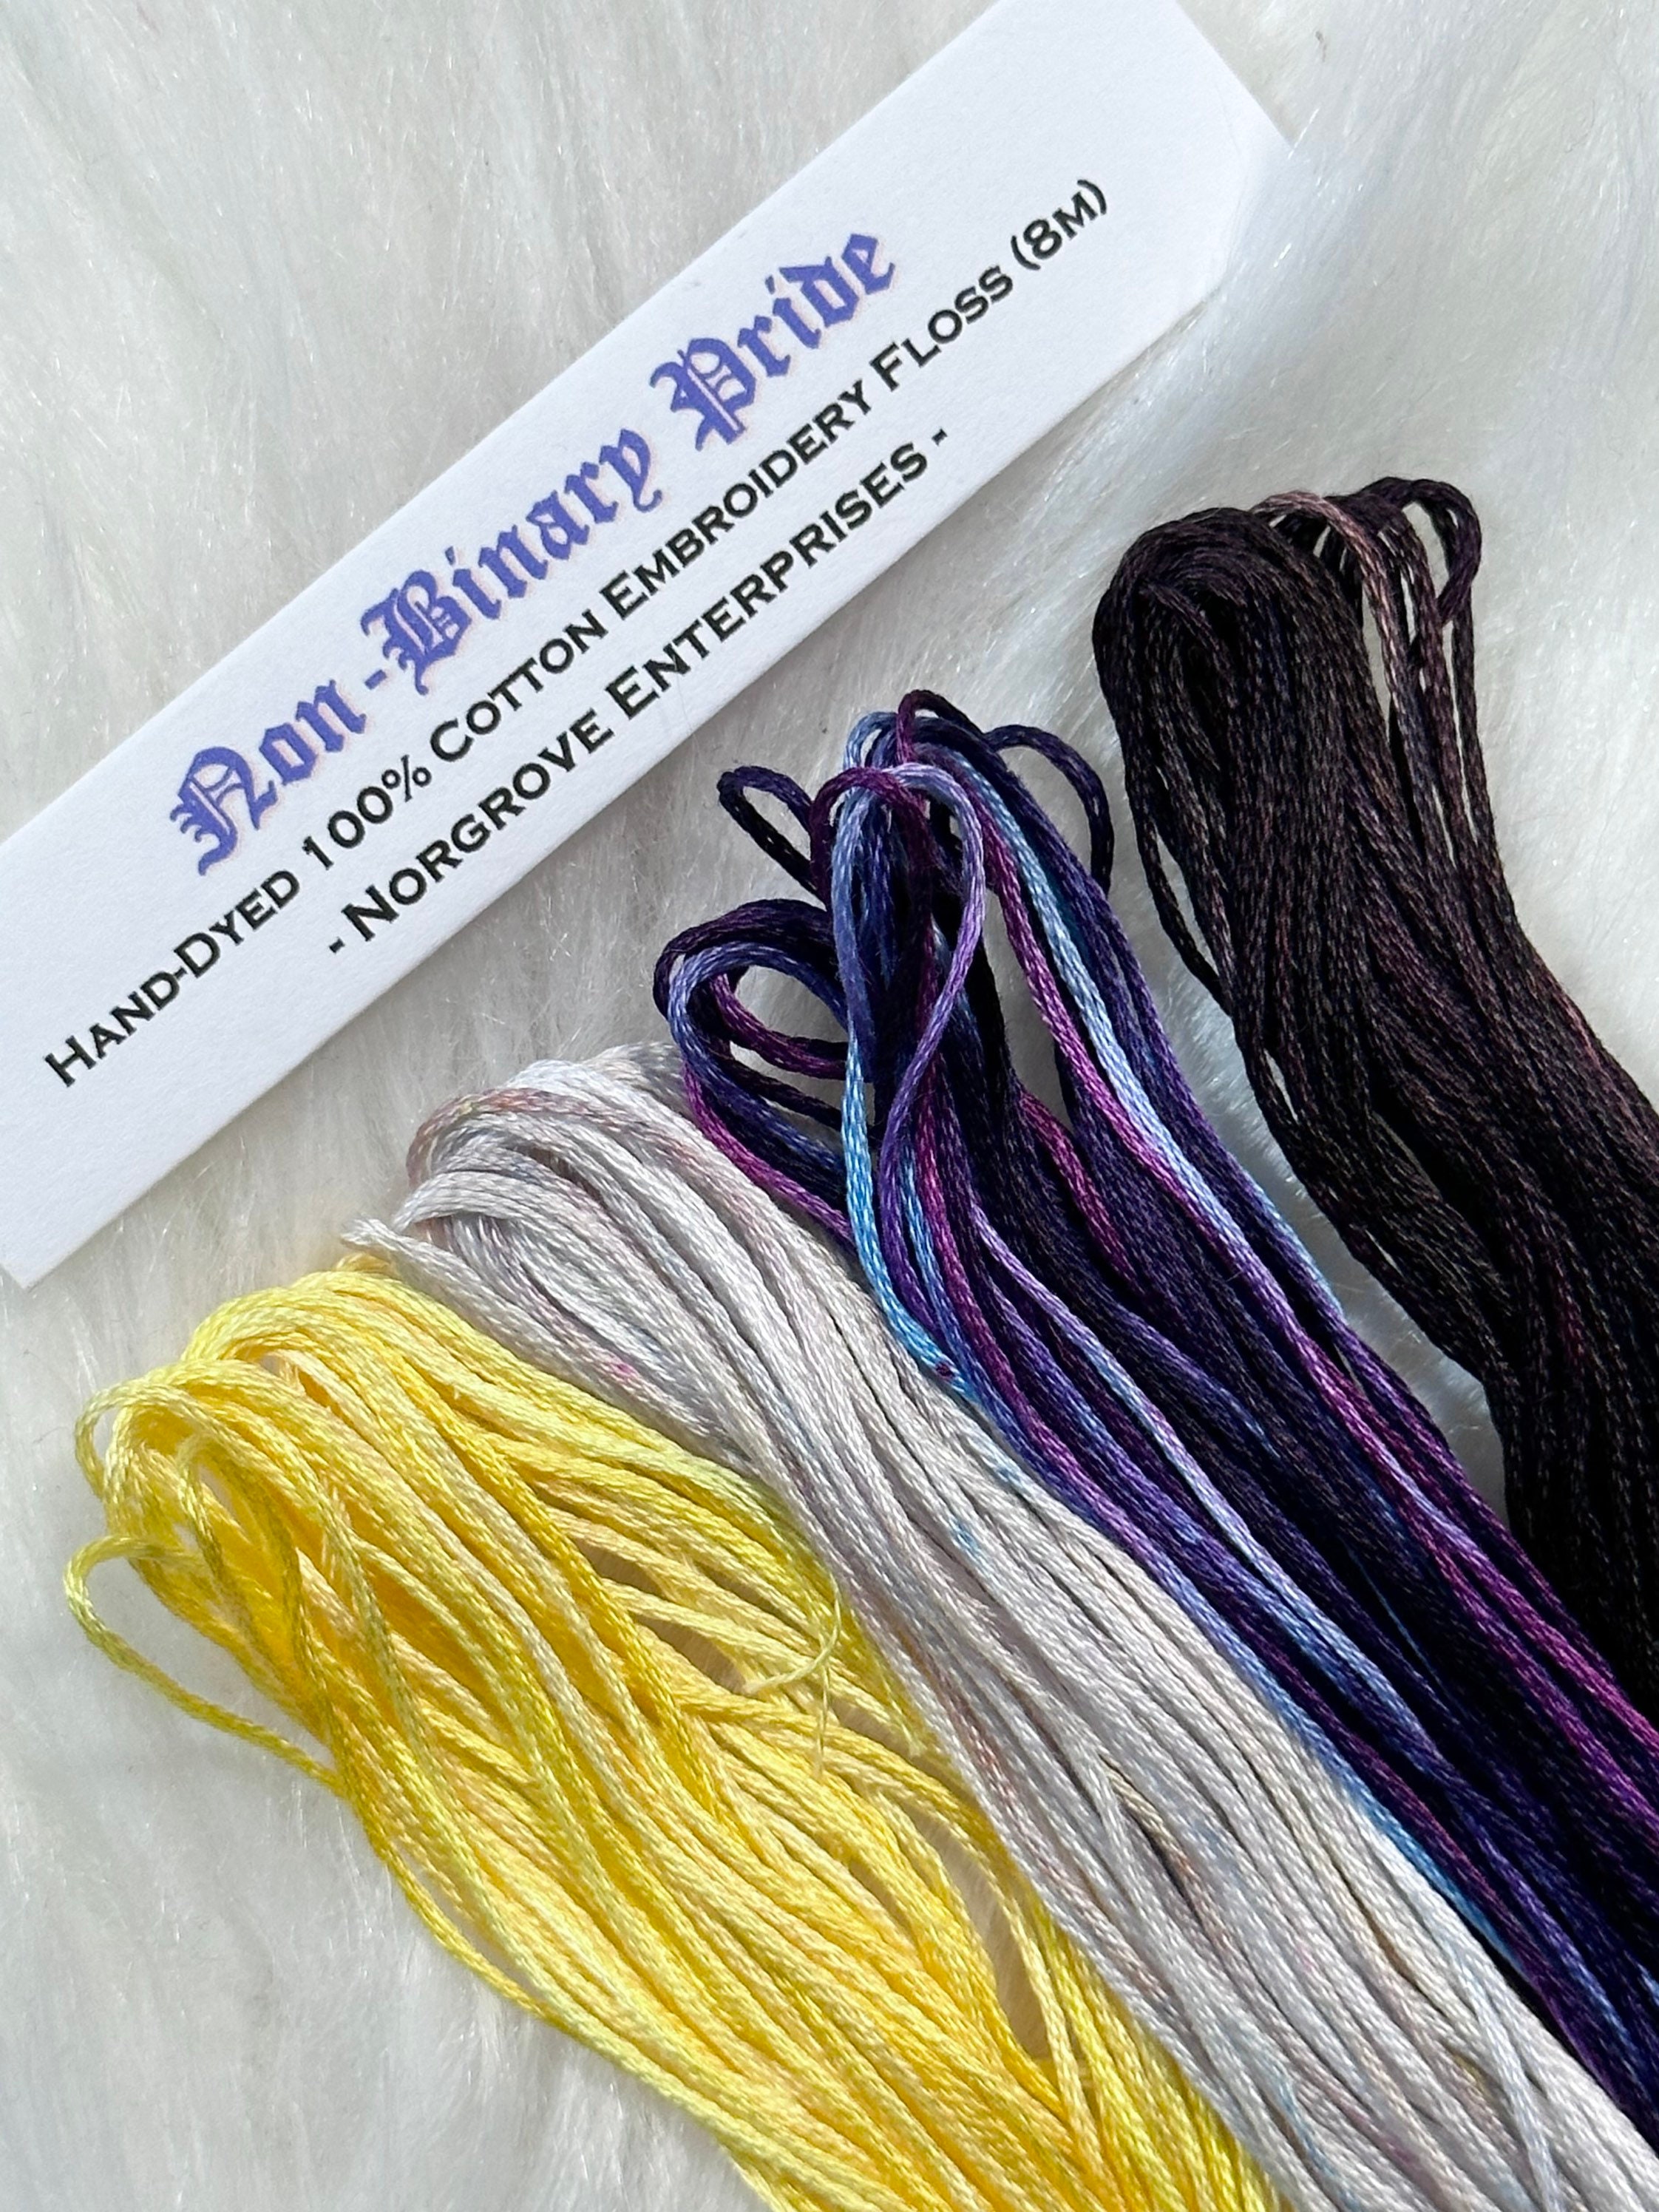 DMC Variegated Embroidery Floss Set, Six Stranded Cotton Thread